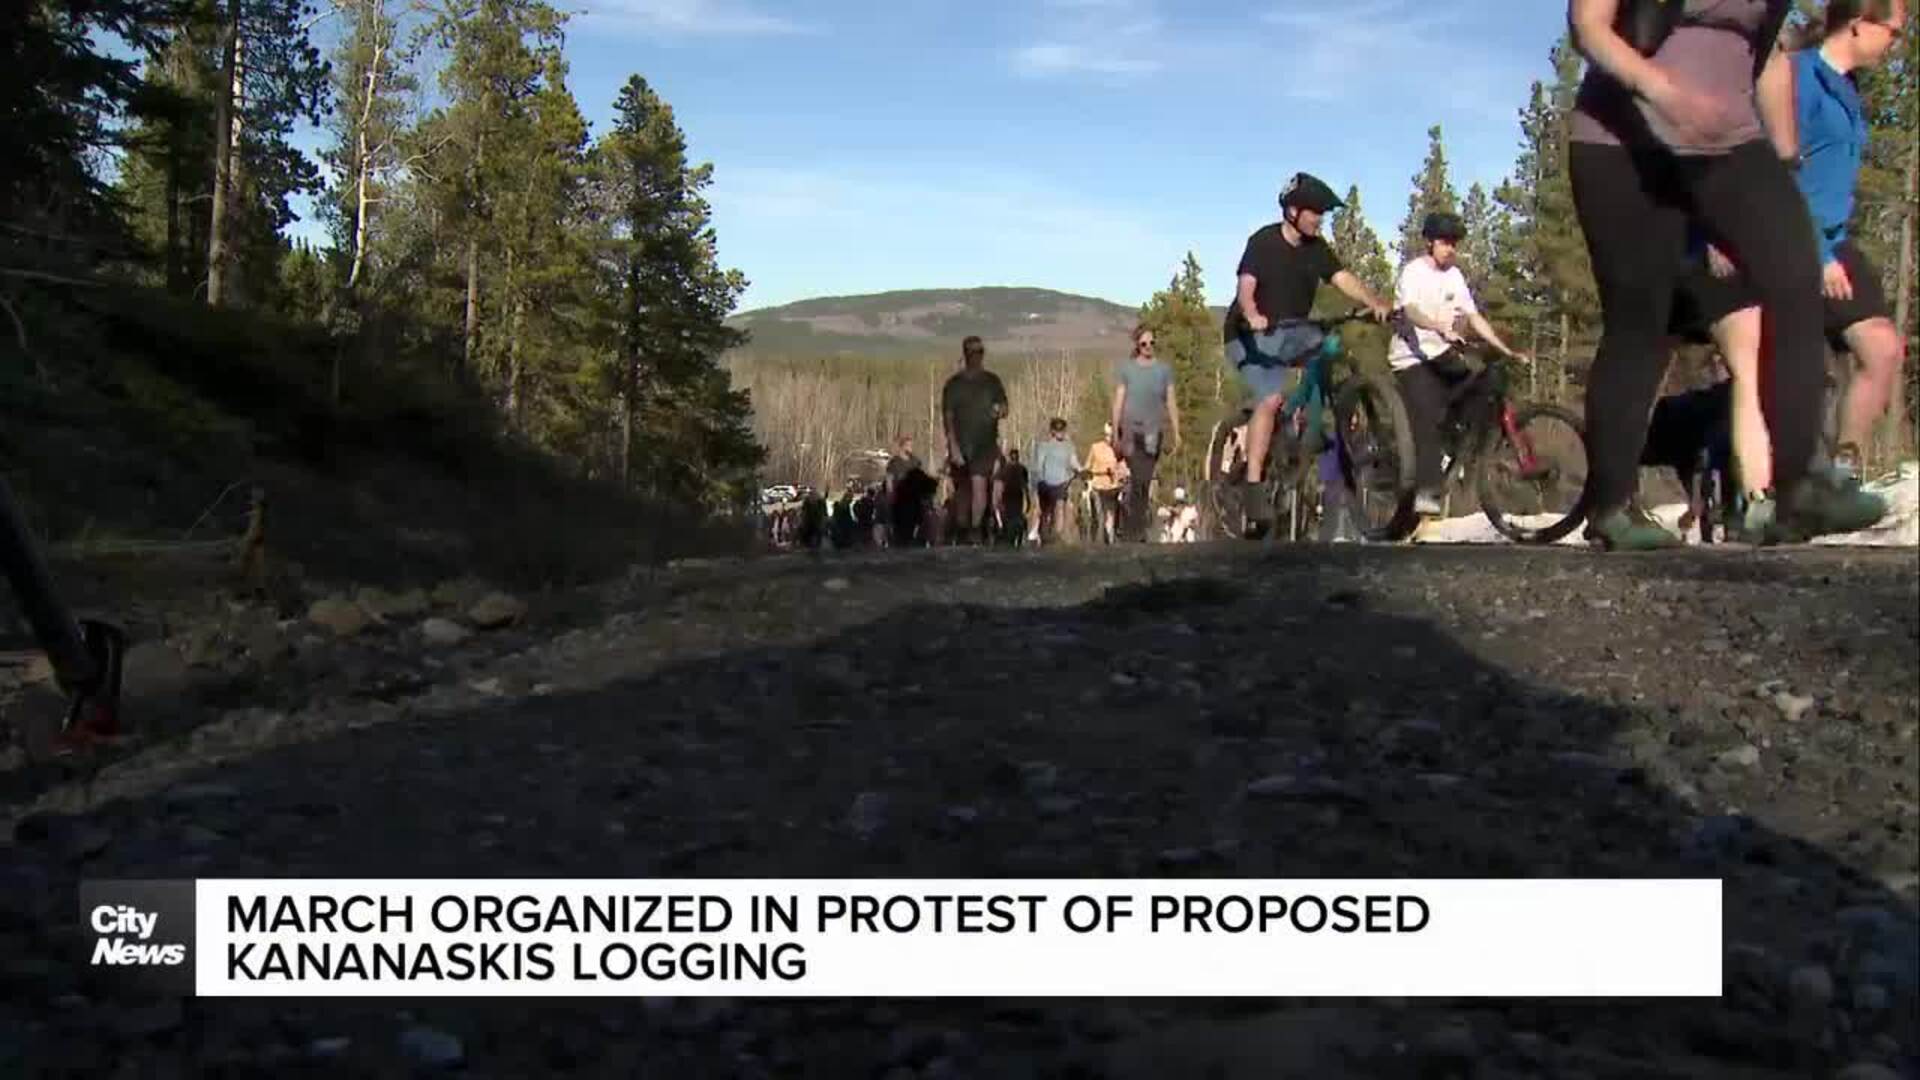 March organized in protest of proposed Kananaskis logging